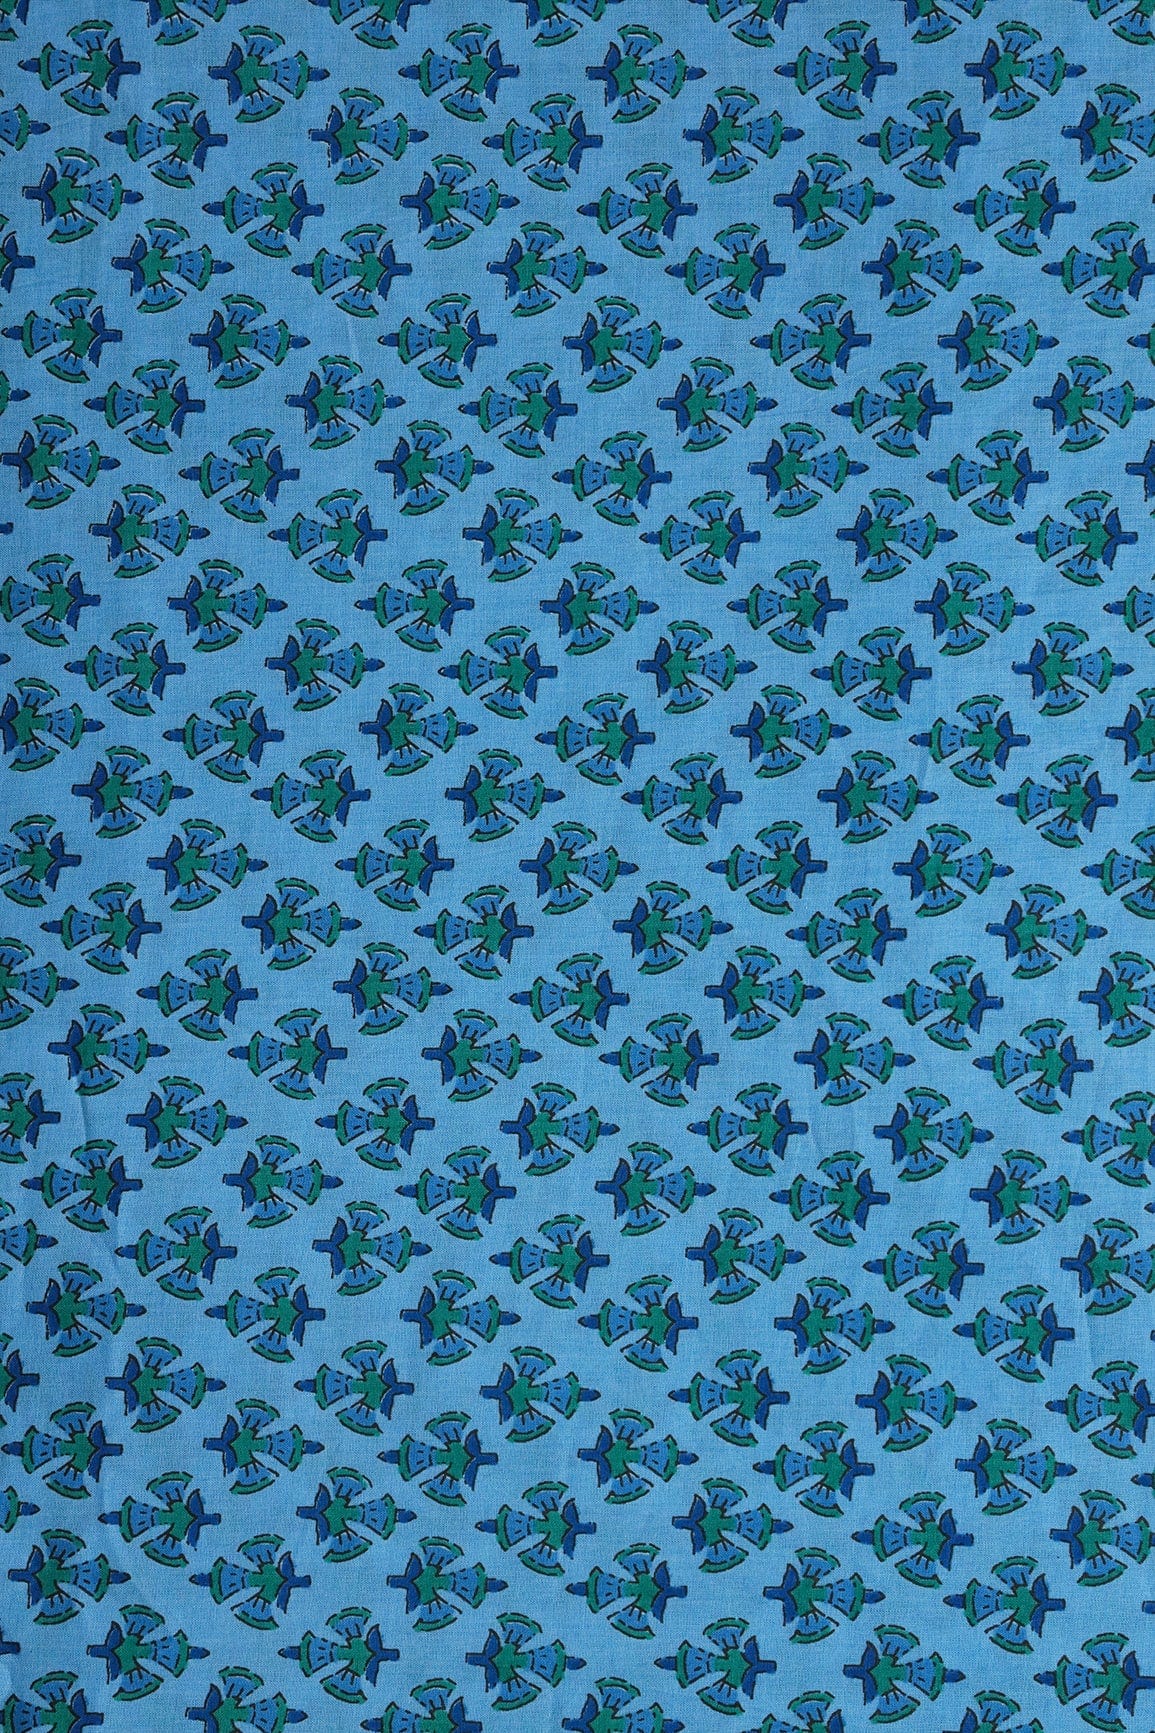 doeraa Prints Green And Carolina Blue Floral Print On Pure Mul Cotton Fabric